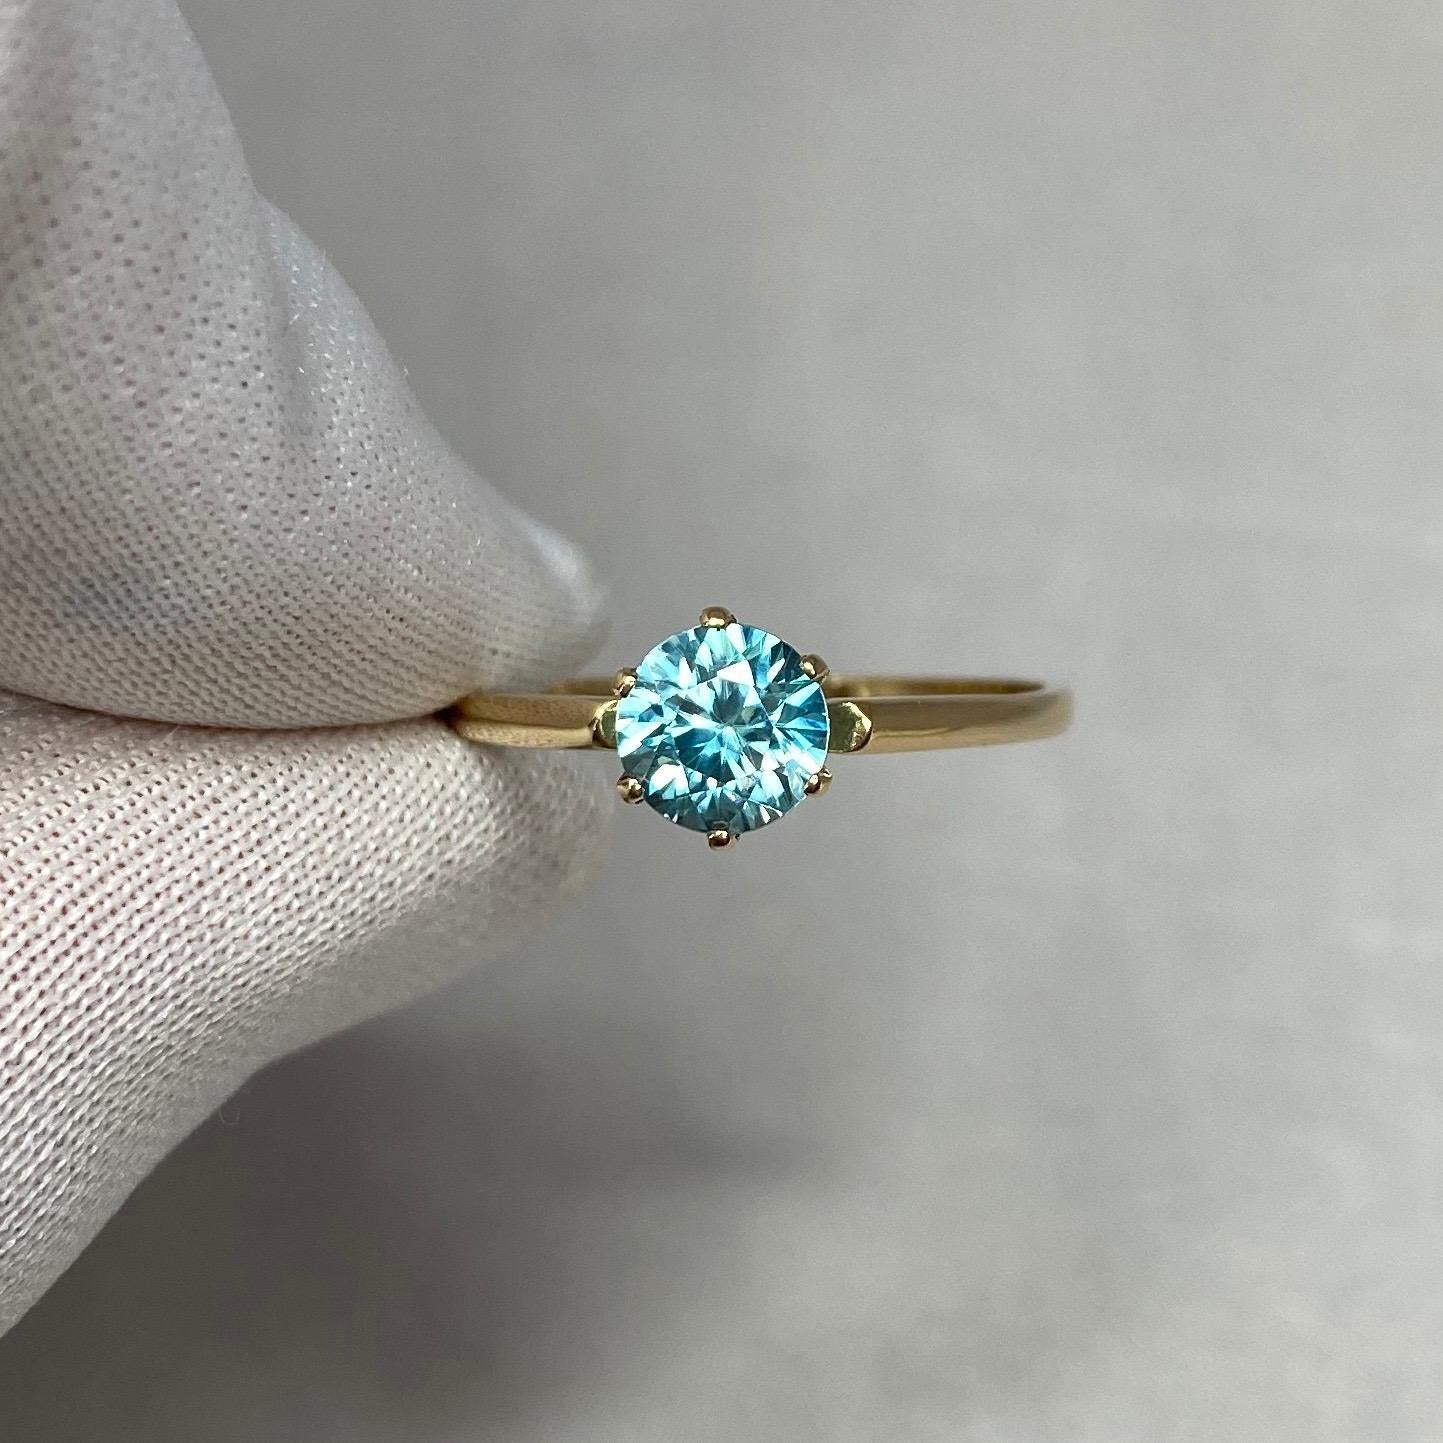 Stunning Vivid Blue Zircon 14k Yellow Gold Solitaire Ring.

1.26 Carat Zircon with a beautiful vivid blue colour and very good clarity, some small natural inclusions visible when looking closely but not a dirty stone.
Also has an excellent round